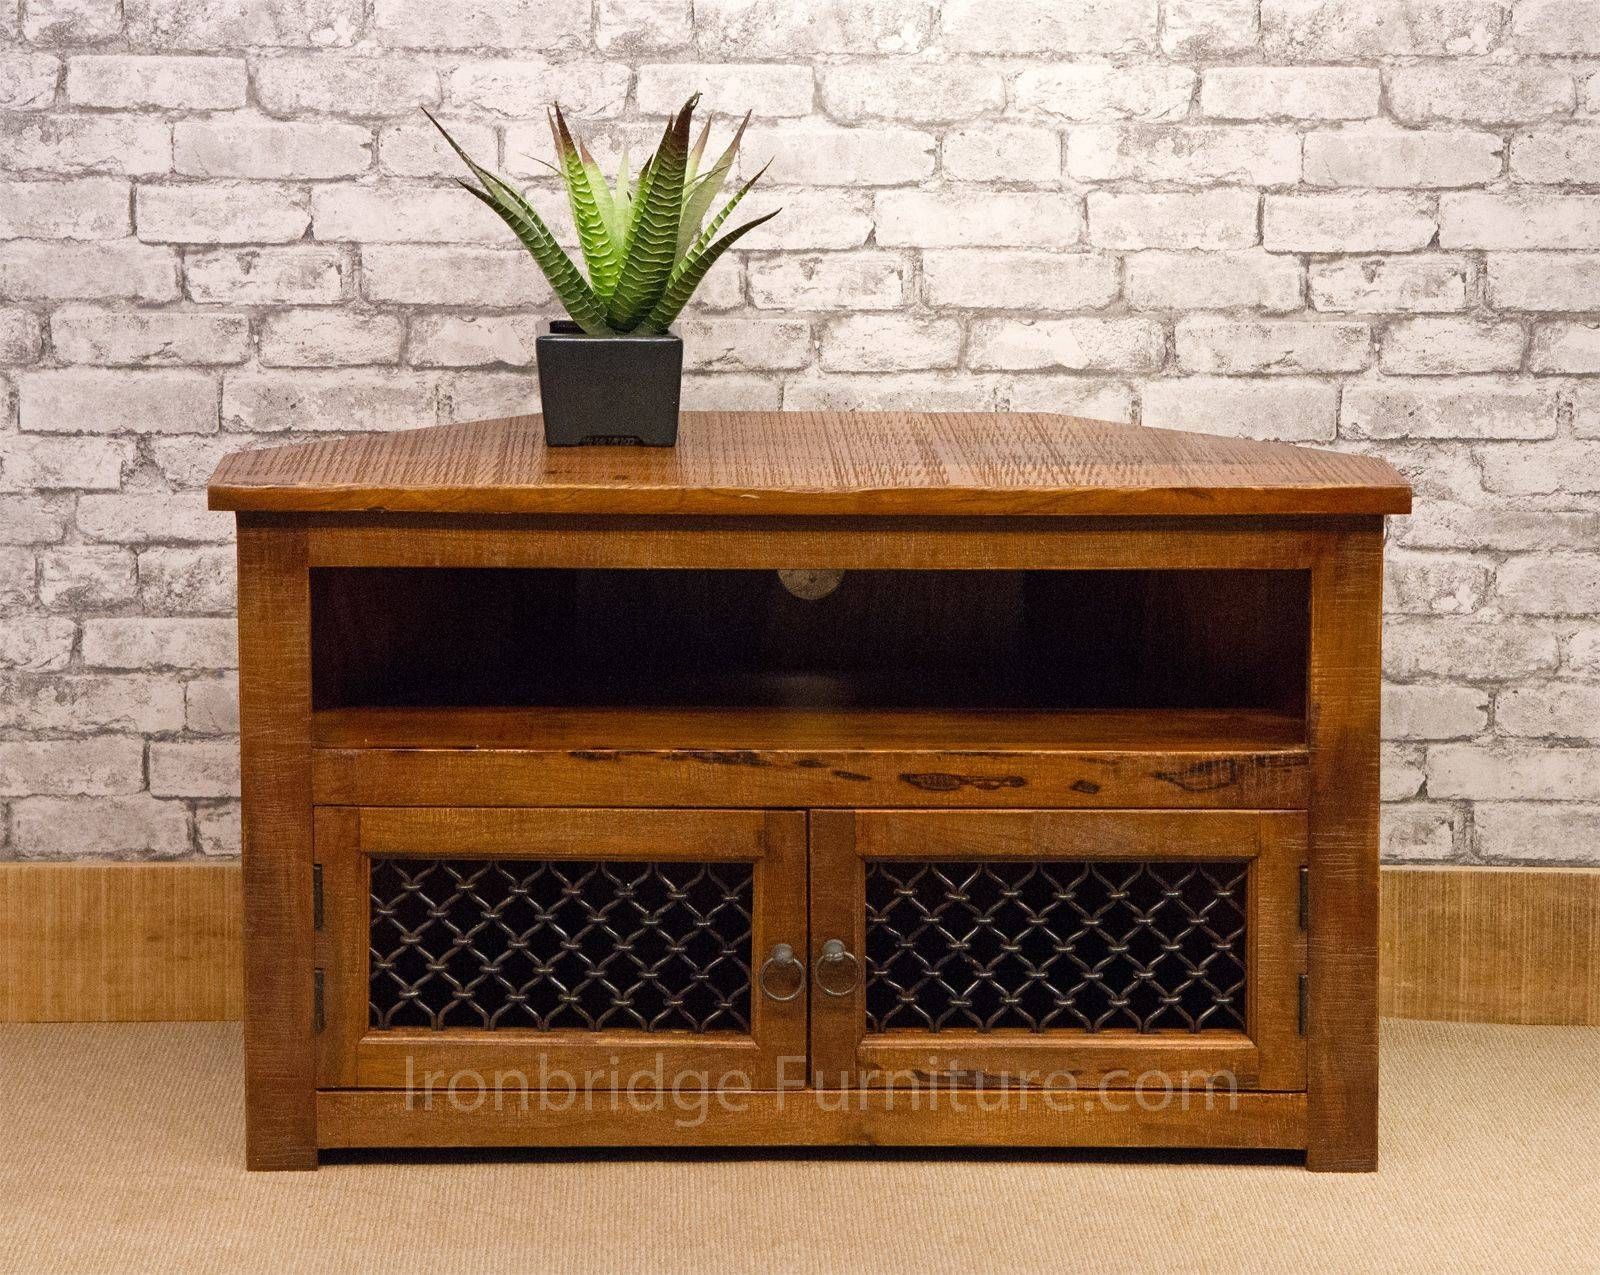 13 Jali Rustic Farm Corner Tv Stand 100cm Intended For 100cm Tv Stands (View 10 of 15)